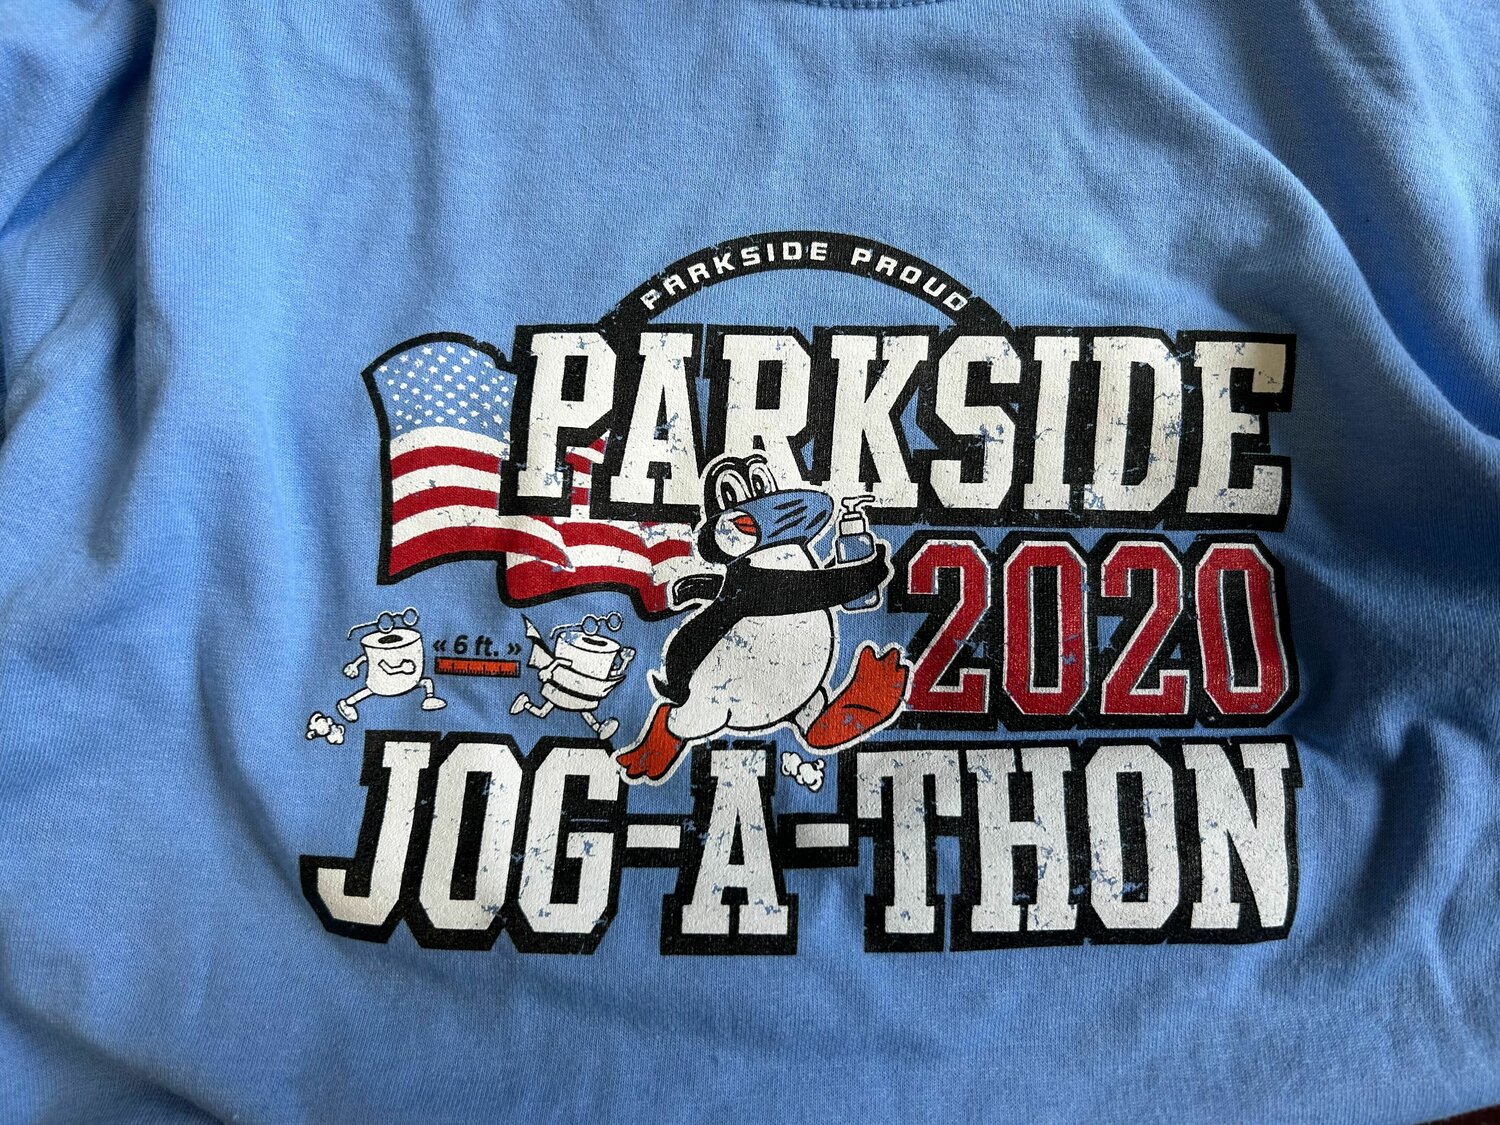 The T-shirt design Parkside Elementary School chose for its 2020 Jog-A-Thon, which was held remotely due to COVID-19 pandemic-related restrictions that were active at the time the event took place.